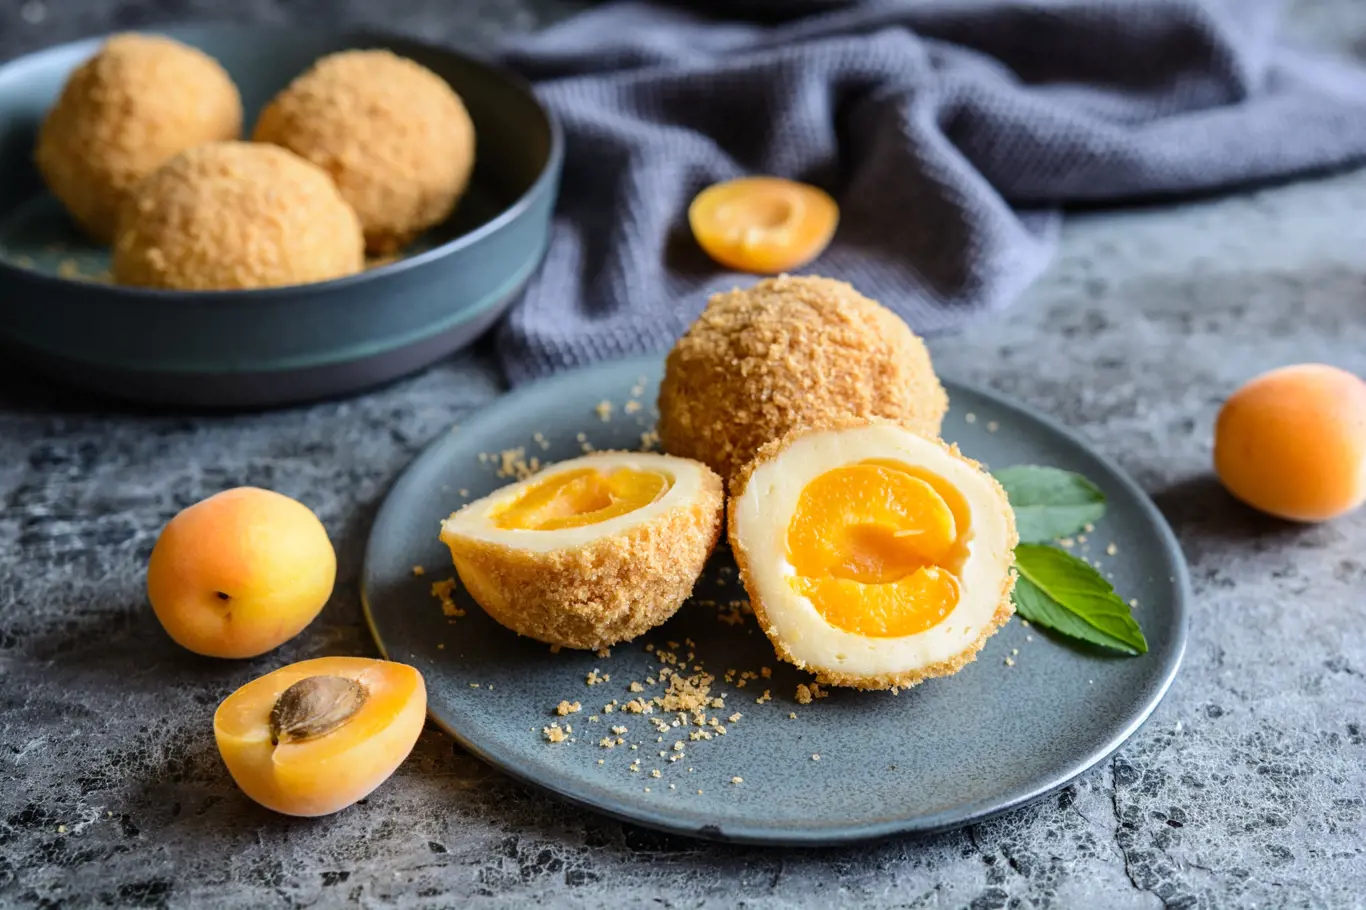 Marillenknödel – traditional Austrian sweet dumplings stuffed with apricot and coated with breadcrumbs